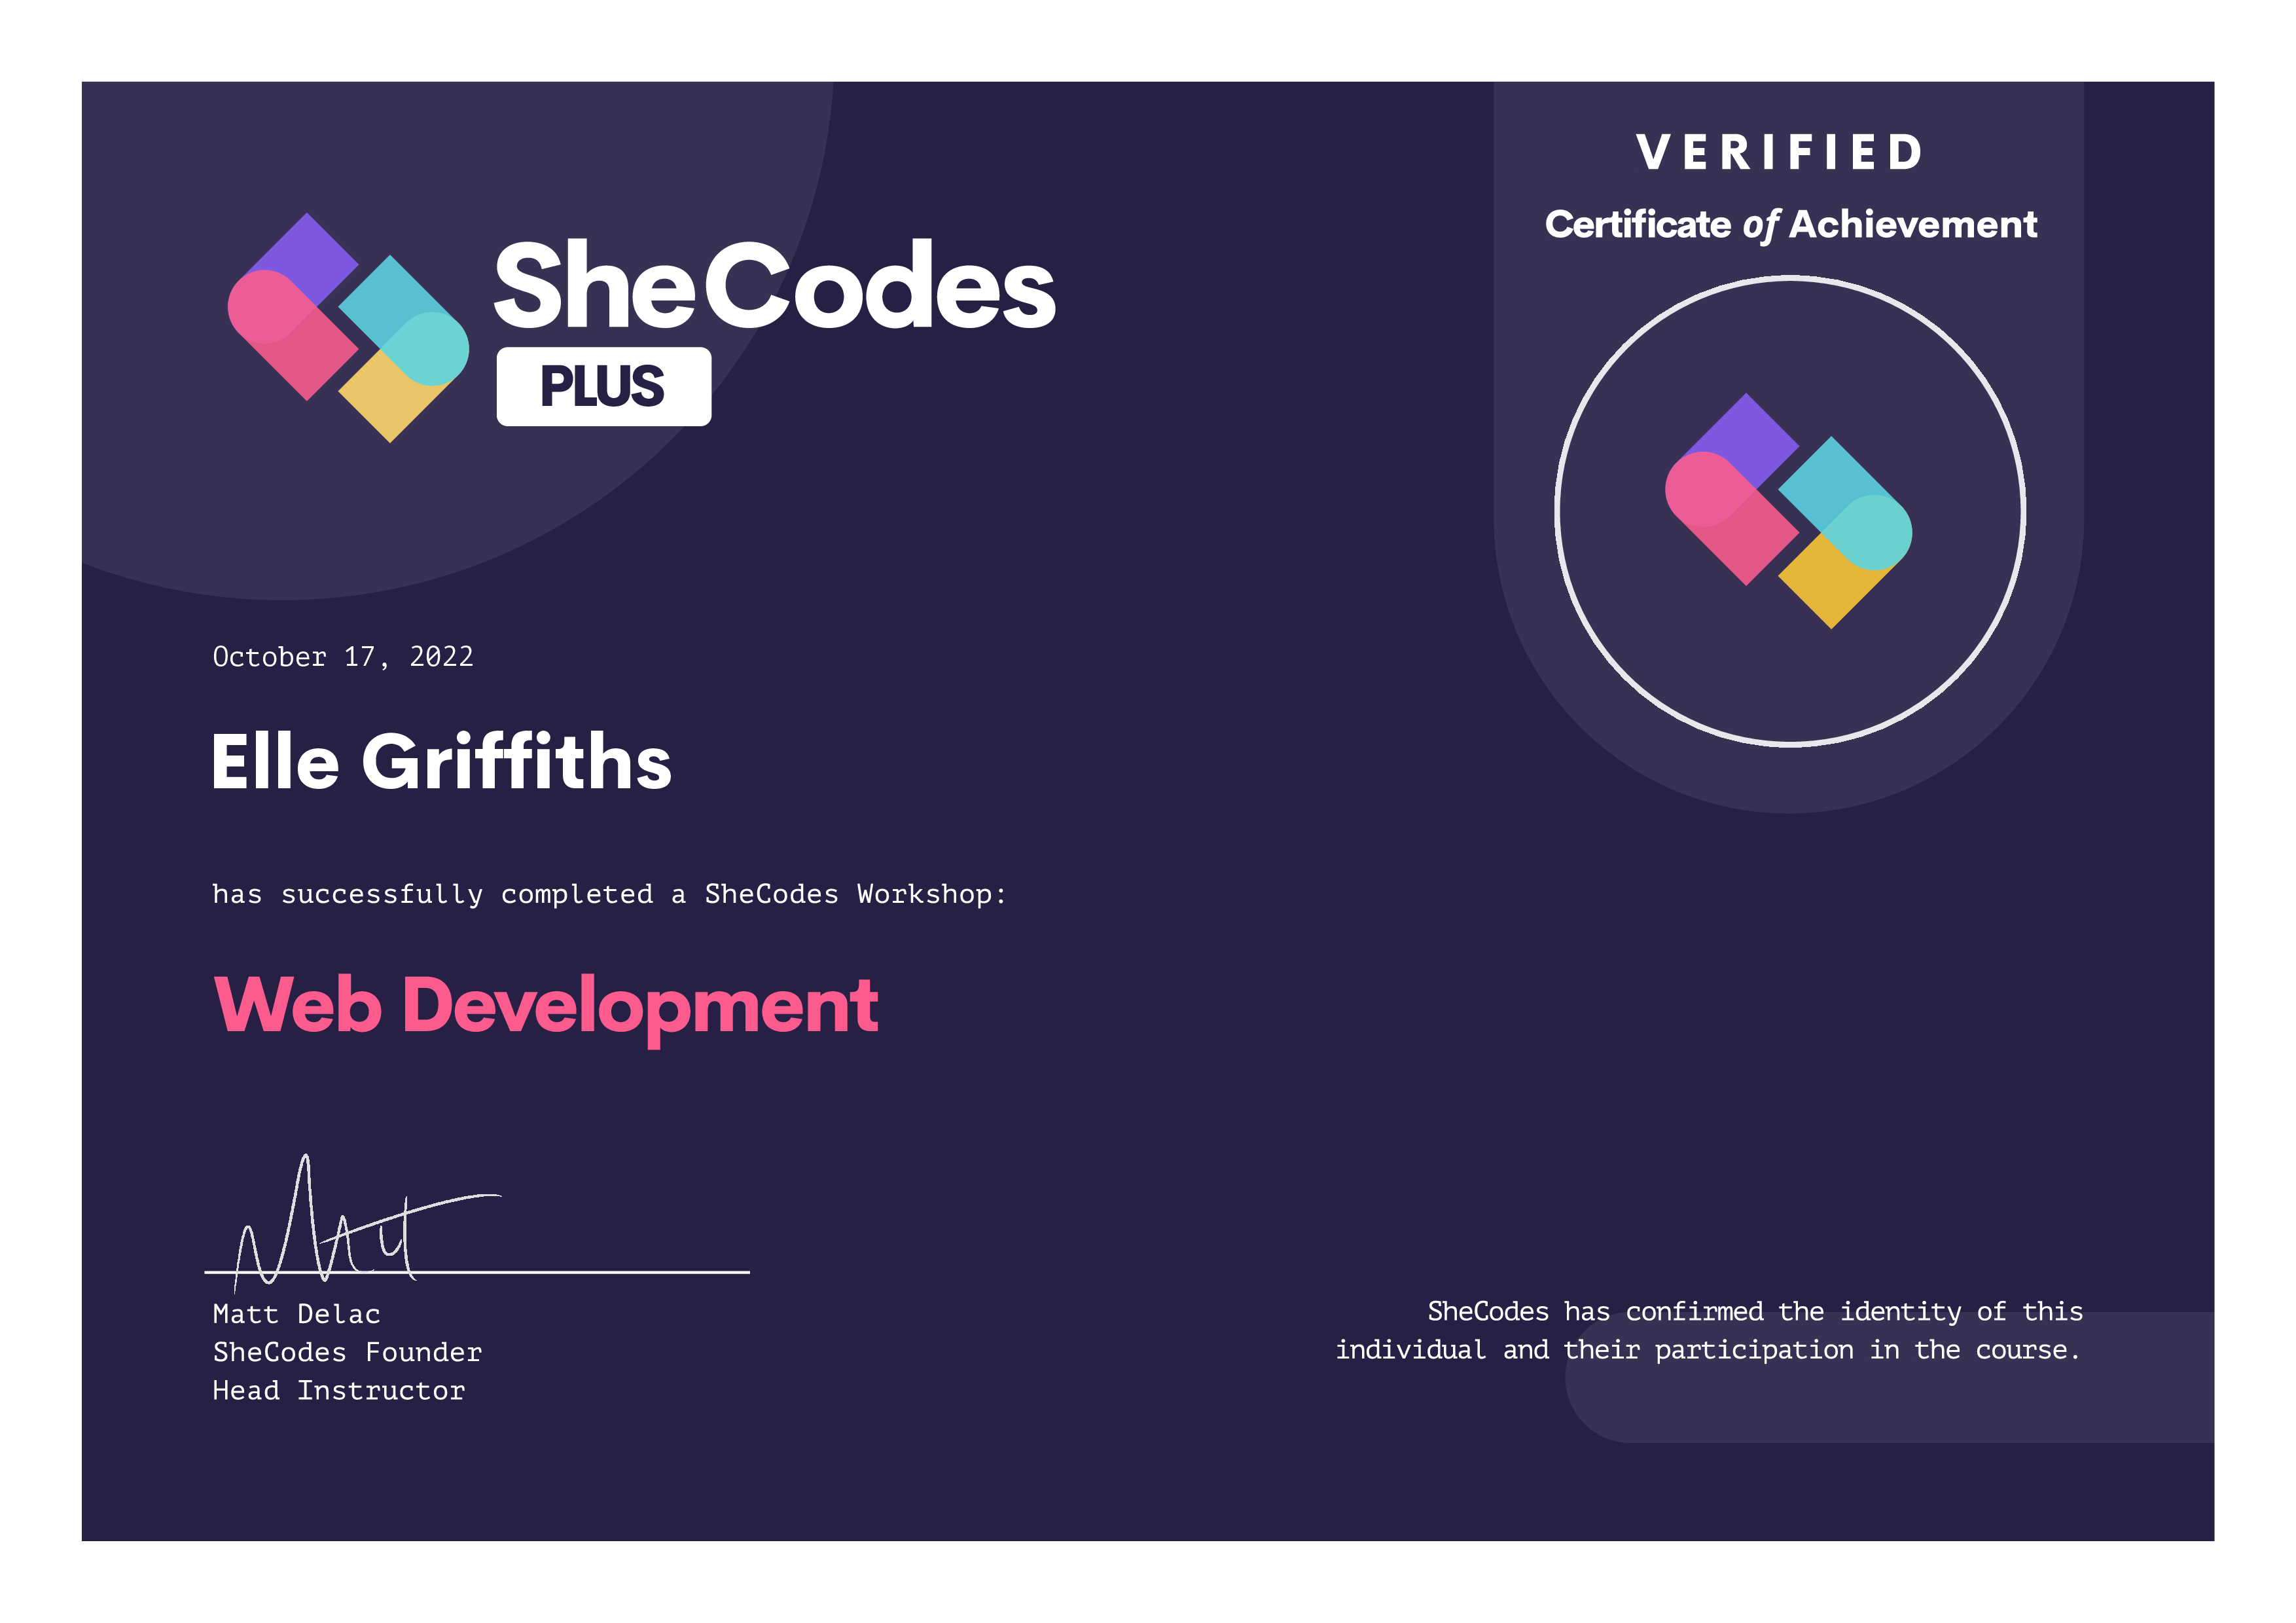 Certificate for completing Shecodes Plus course.